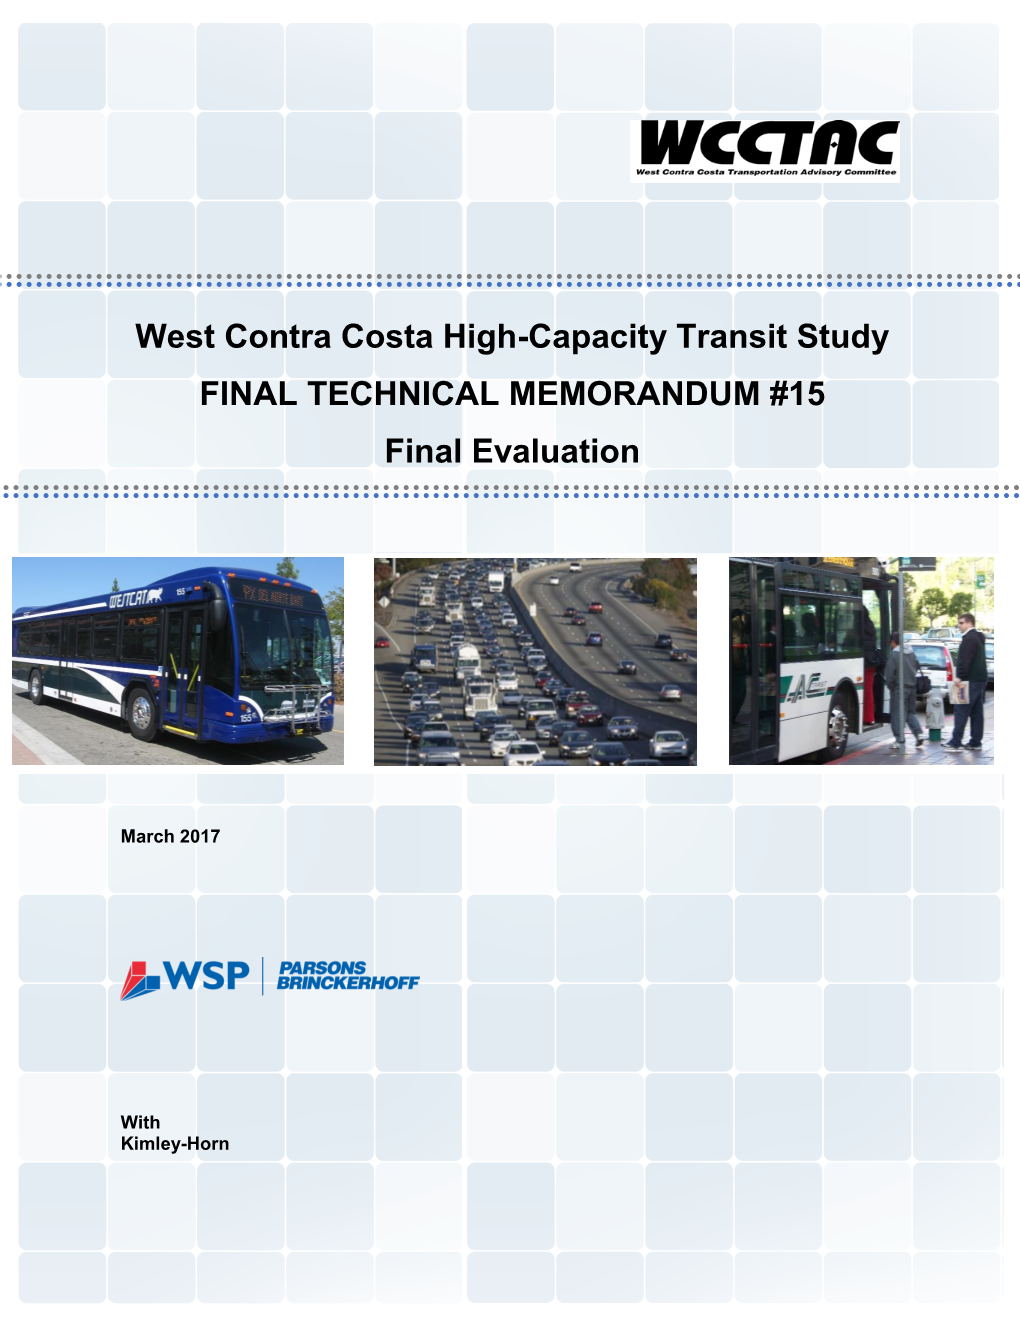 West Contra Costa High-Capacity Transit Study FINAL TECHNICAL